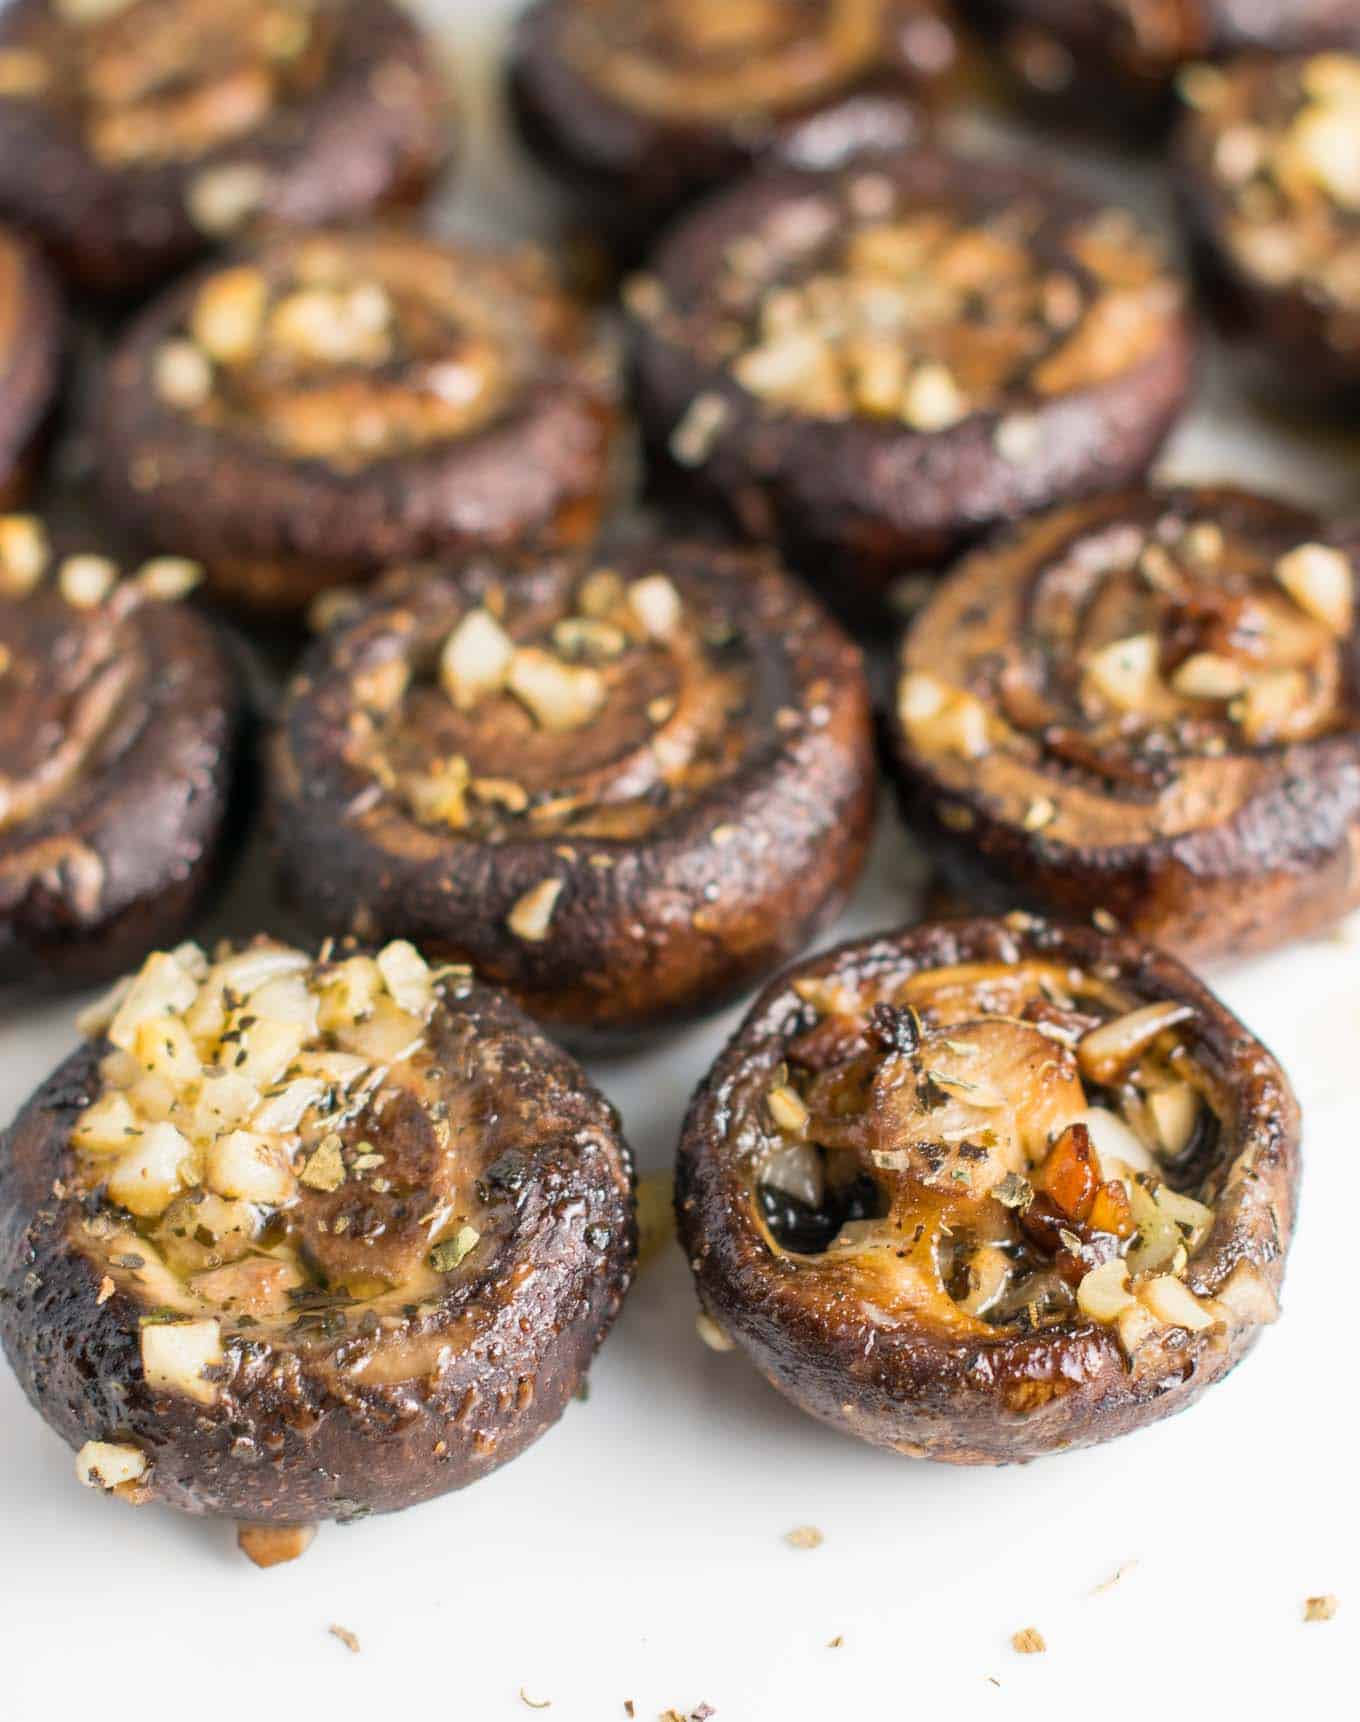 Easy roasted garlic butter mushrooms recipe - a delicious and addictive dairy free side dish or appetizer that will disappear in minutes!